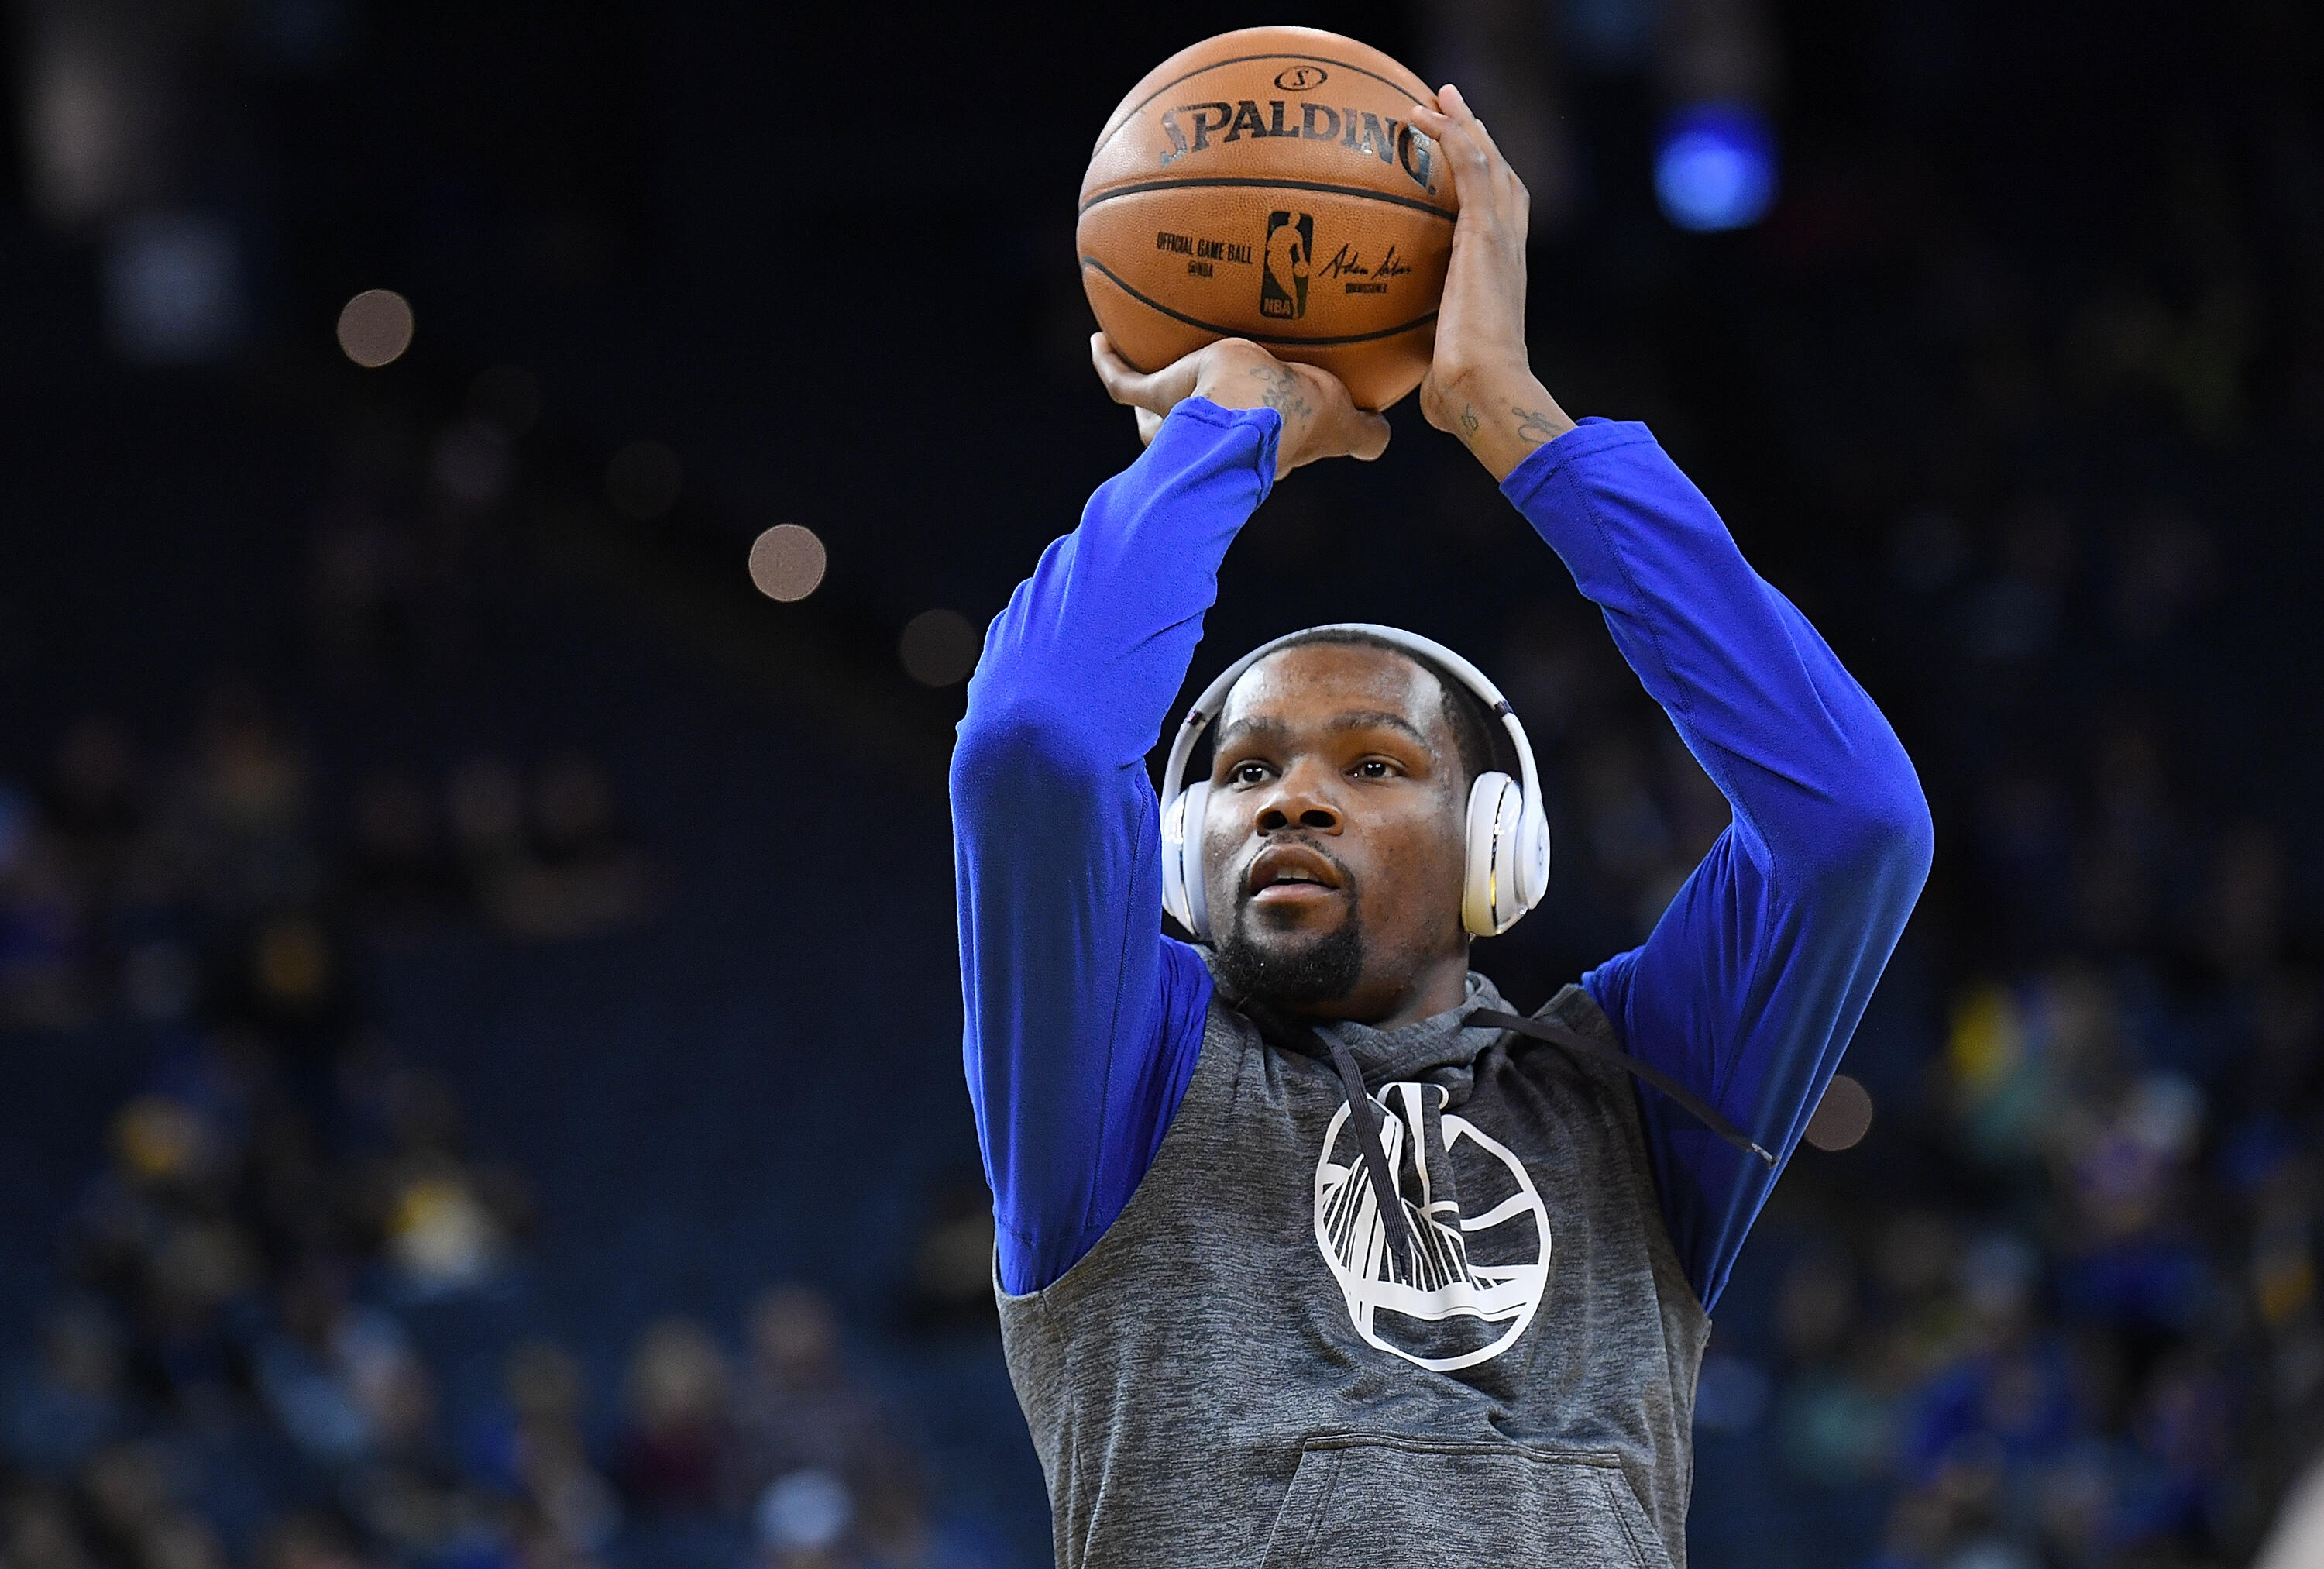 OAKLAND, CA - APRIL 08:  Kevin Durant #35 of the Golden State Warriors warms up prior to the start of an NBA Basketball game against the New Orleans Pelicans at ORACLE Arena on April 8, 2017 in Oakland, California. NOTE TO USER: User expressly acknowledge